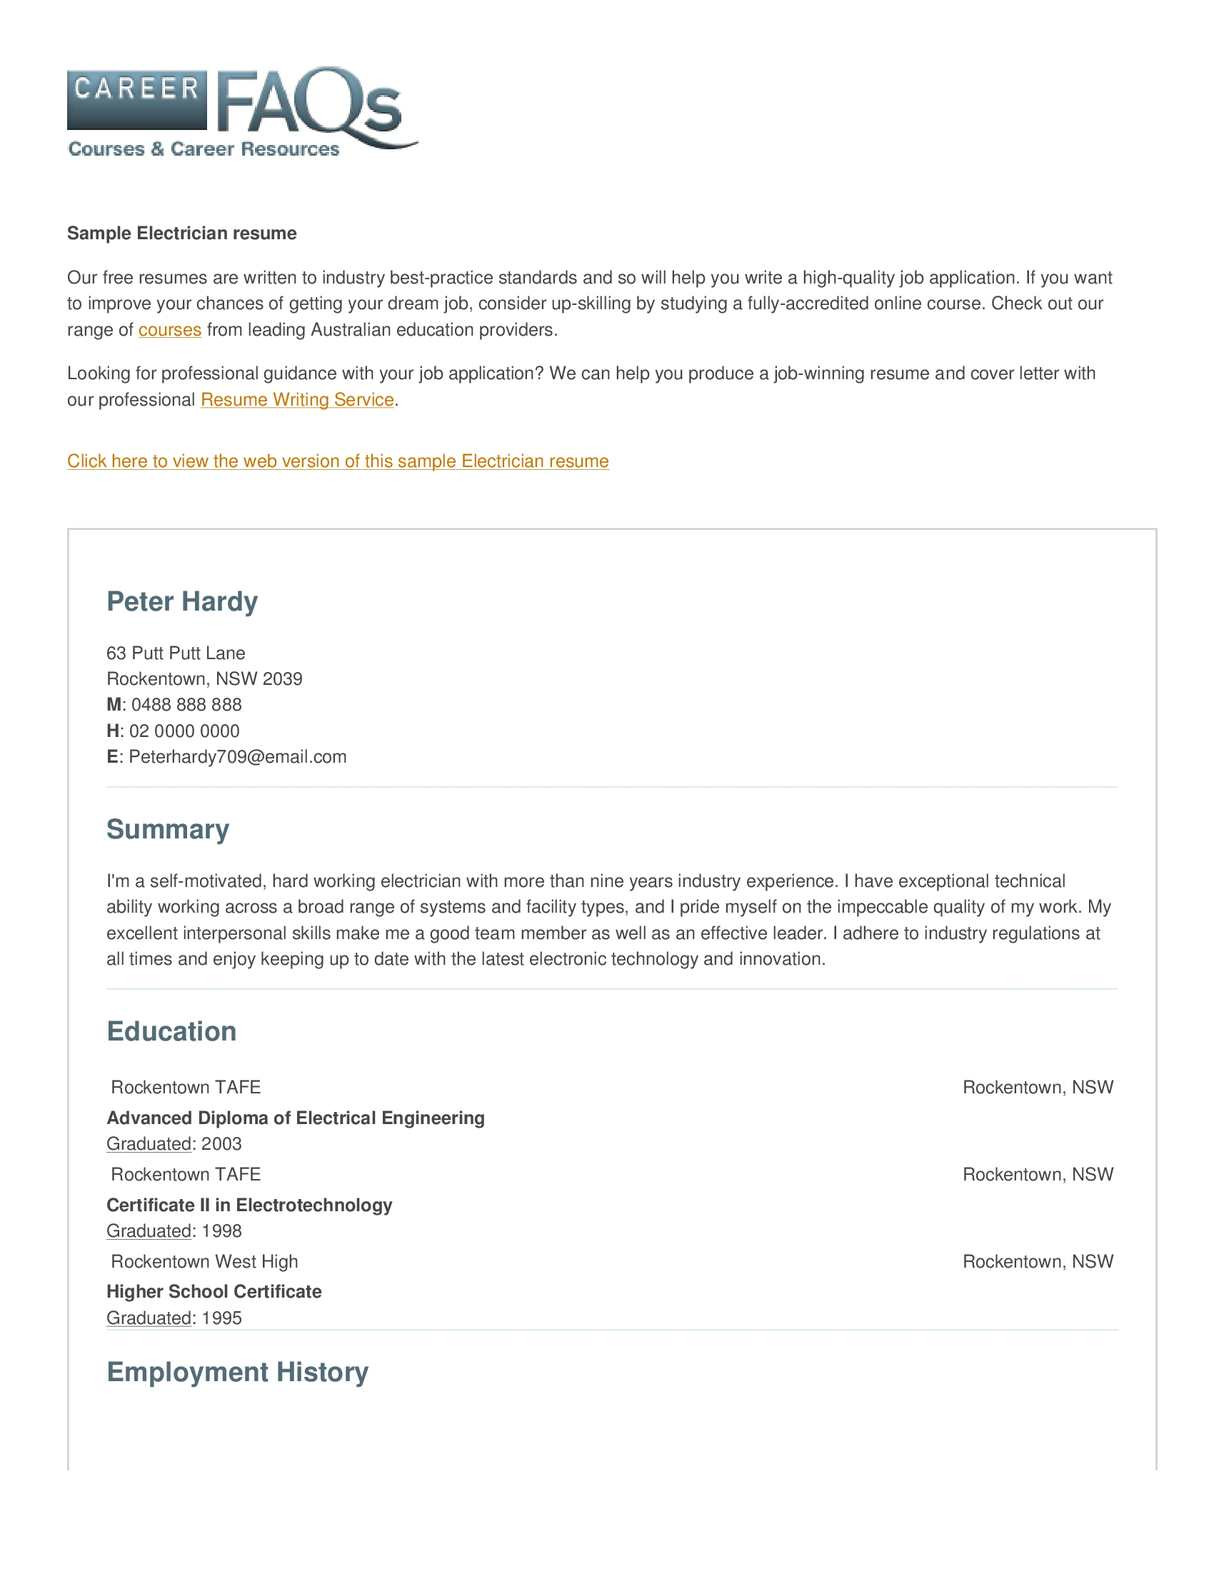 Sample Of A Good Resume Applying for A Electrician CalamÃ©o – Electrician Resume